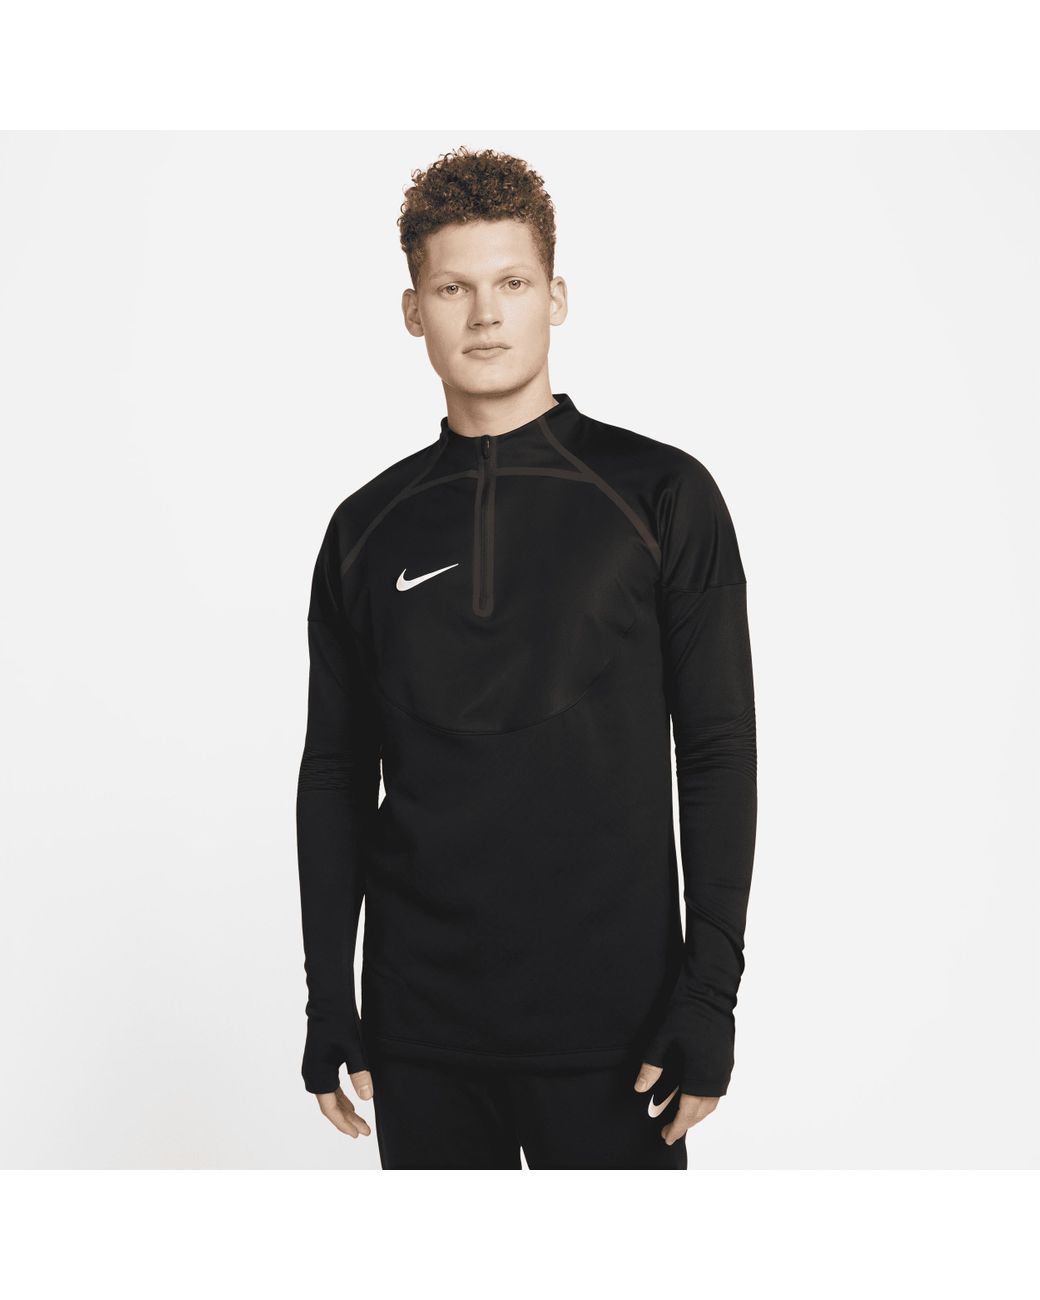 Nike Therma-fit Adv Strike Winter Warrior Football Drill Top in